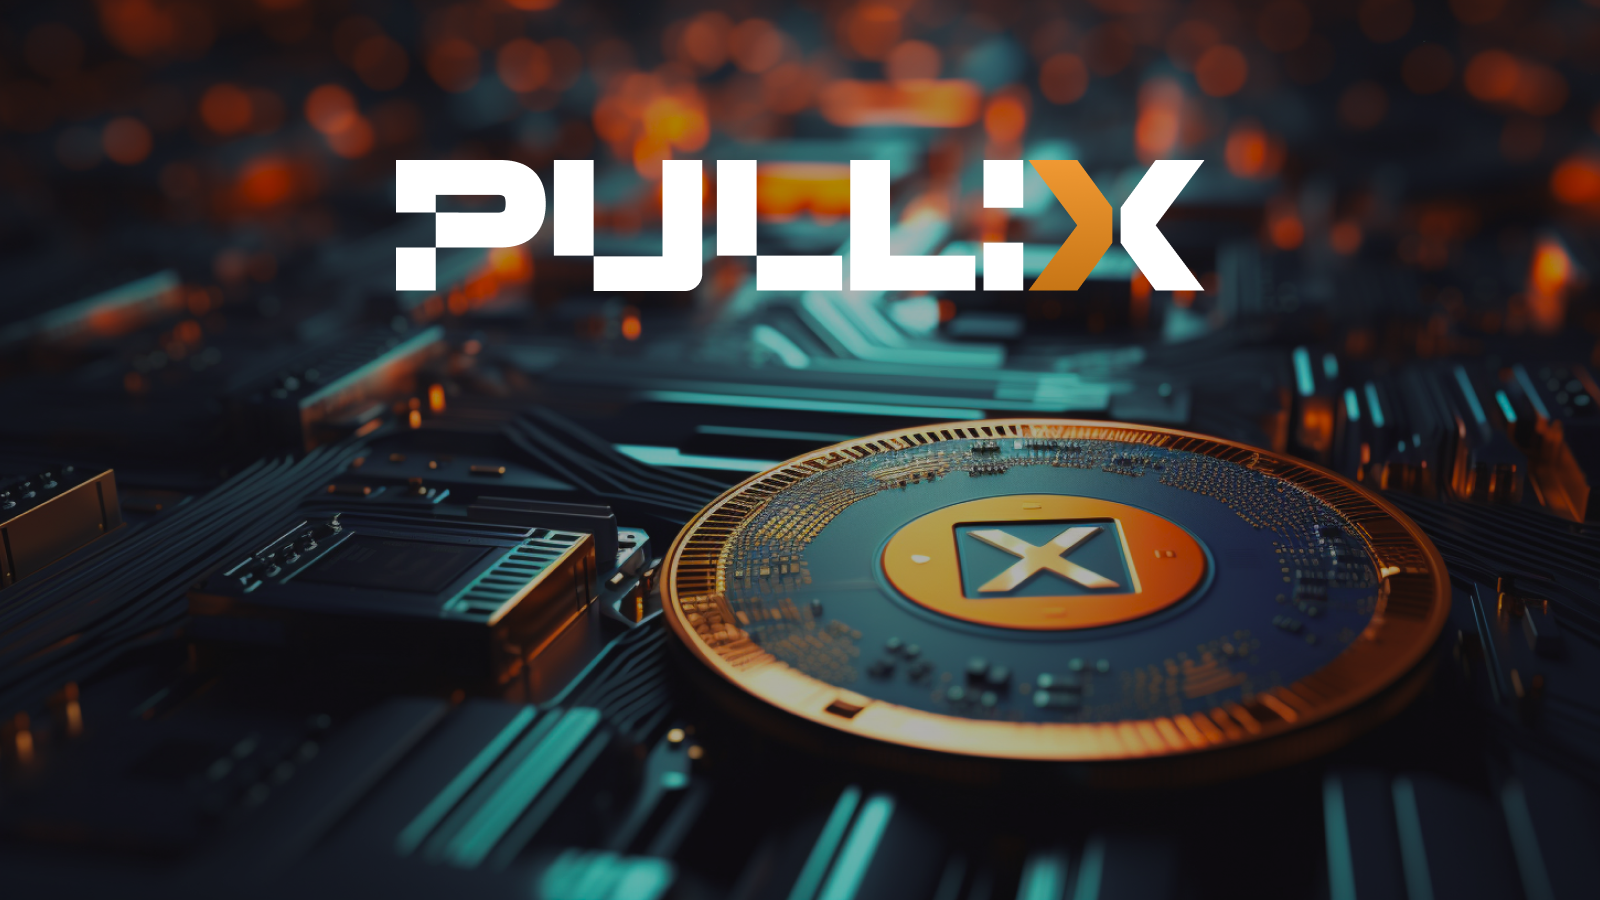 Pepe (PEPE) Grows 608% and Floki (FLOKI) Spikes 323.9% – Traders Diversify With Pullix (PLX) After Massive Price Pump